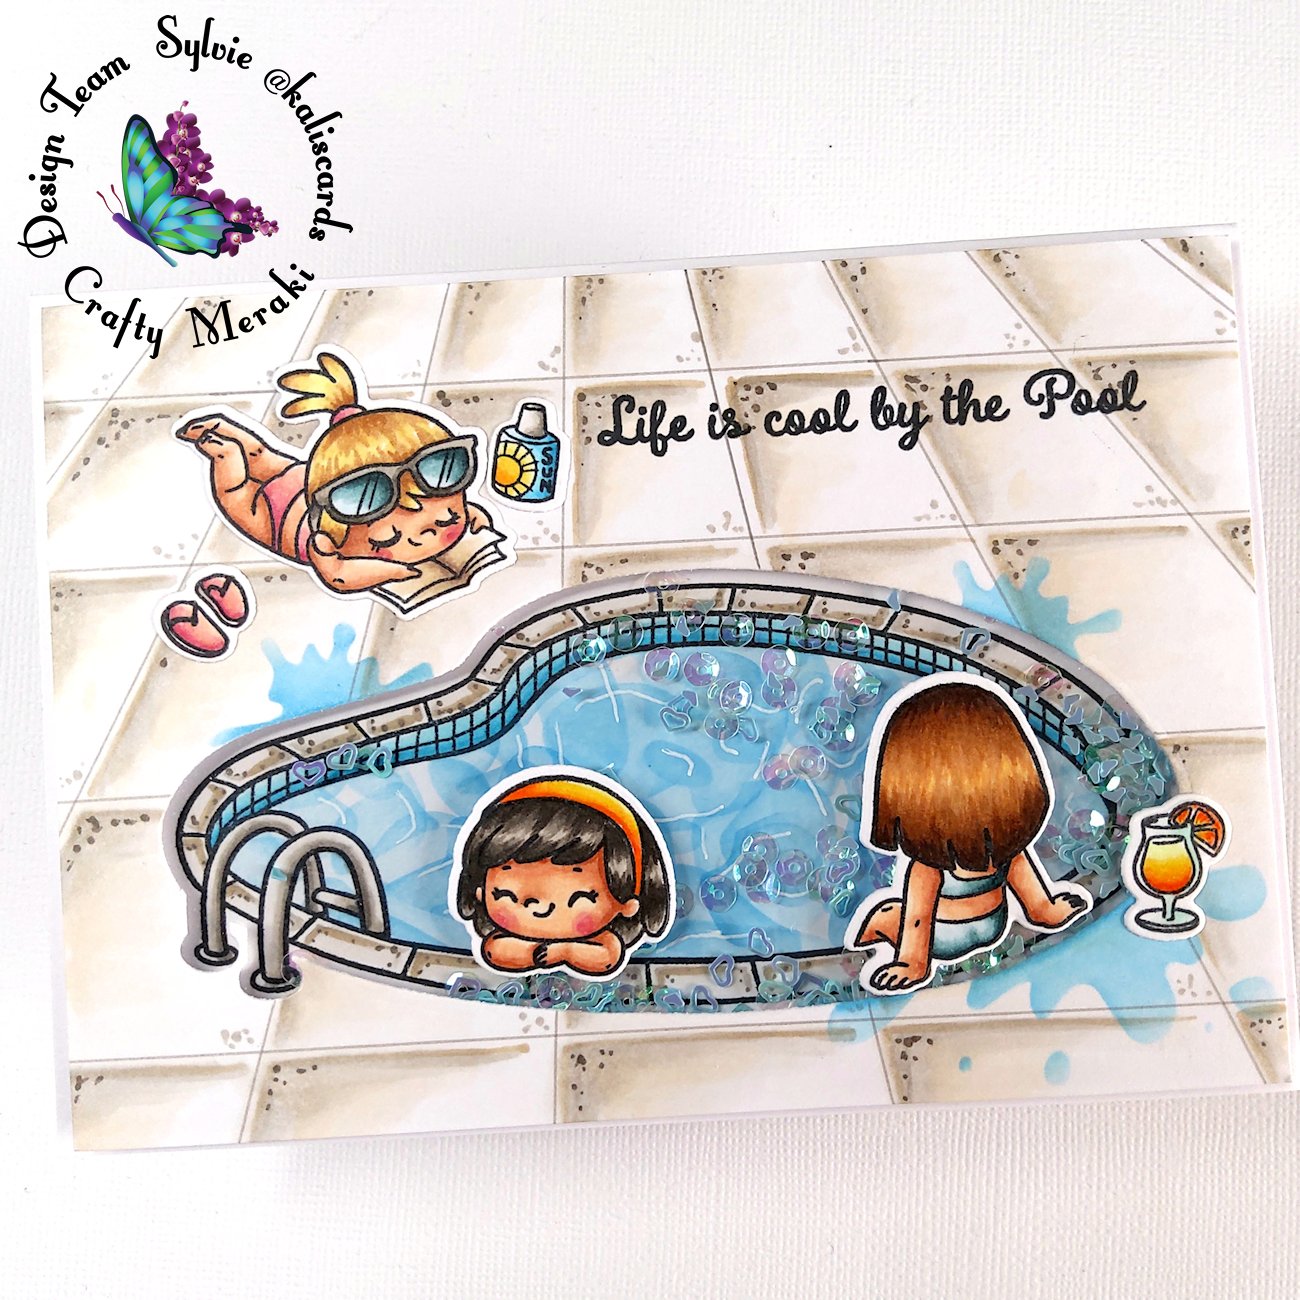 Life is cool by the pool by Sylvie @Kaliscards